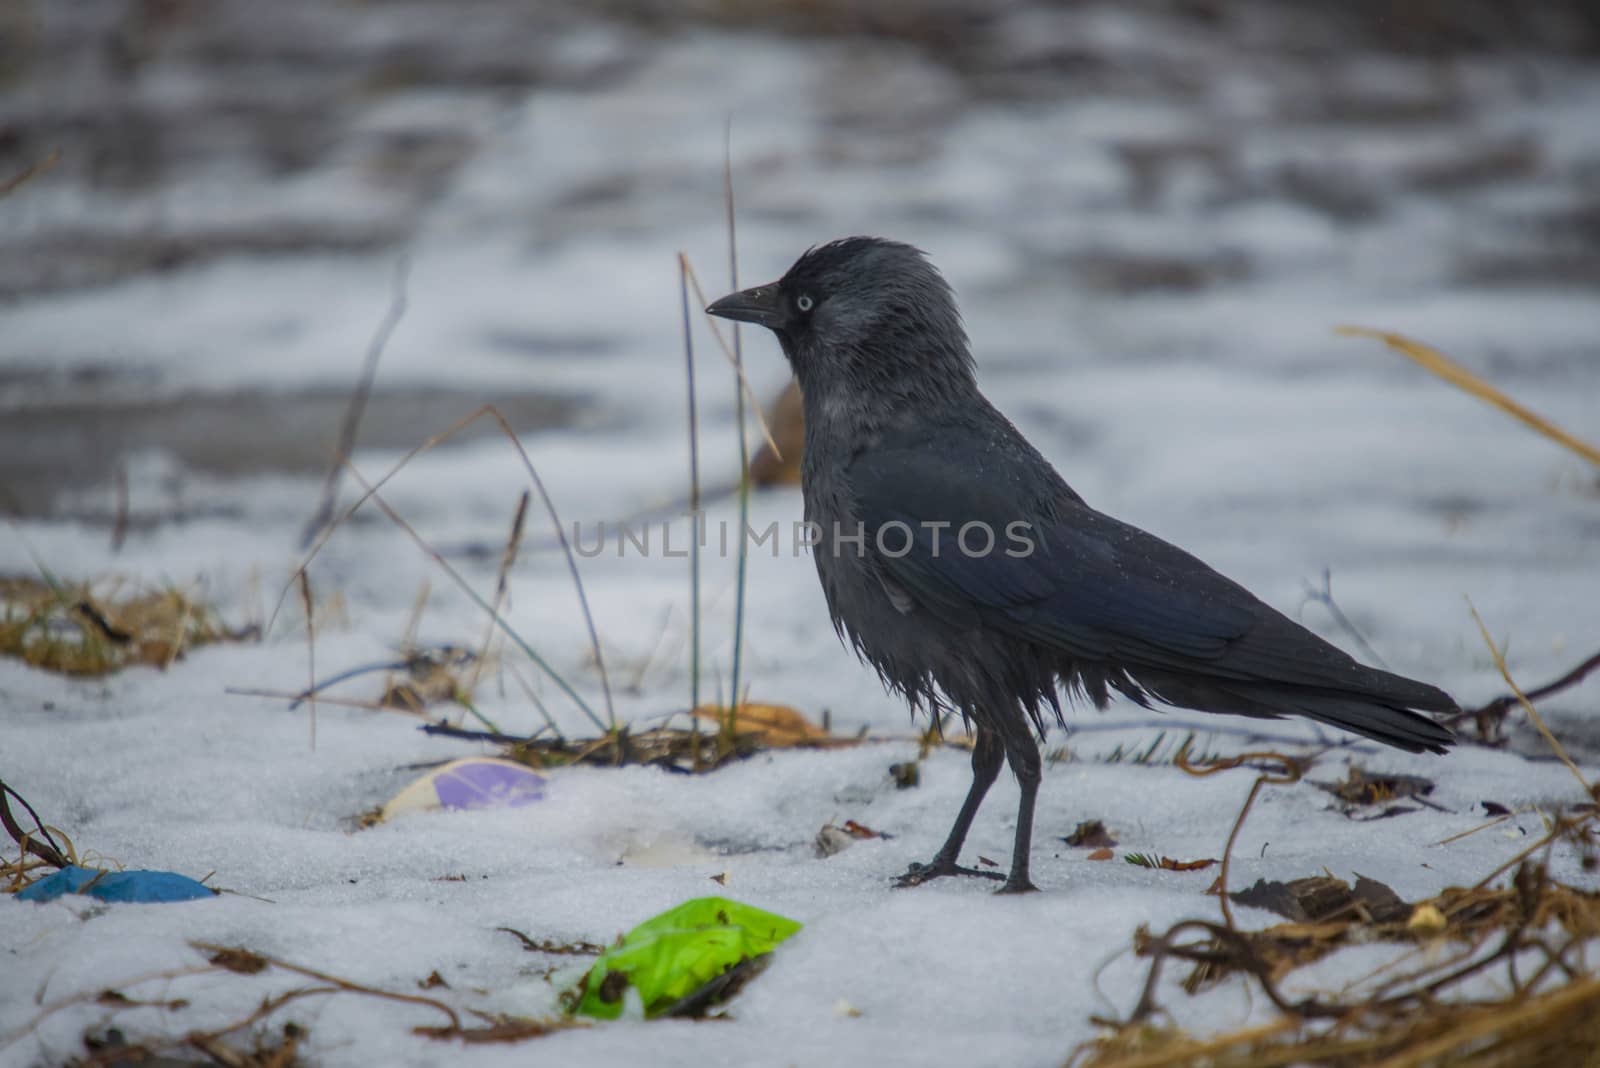 there is a teeming bird life at the tista river in Halden, the picture is shot one day in february 2013 and shows a jackdaw looking for food